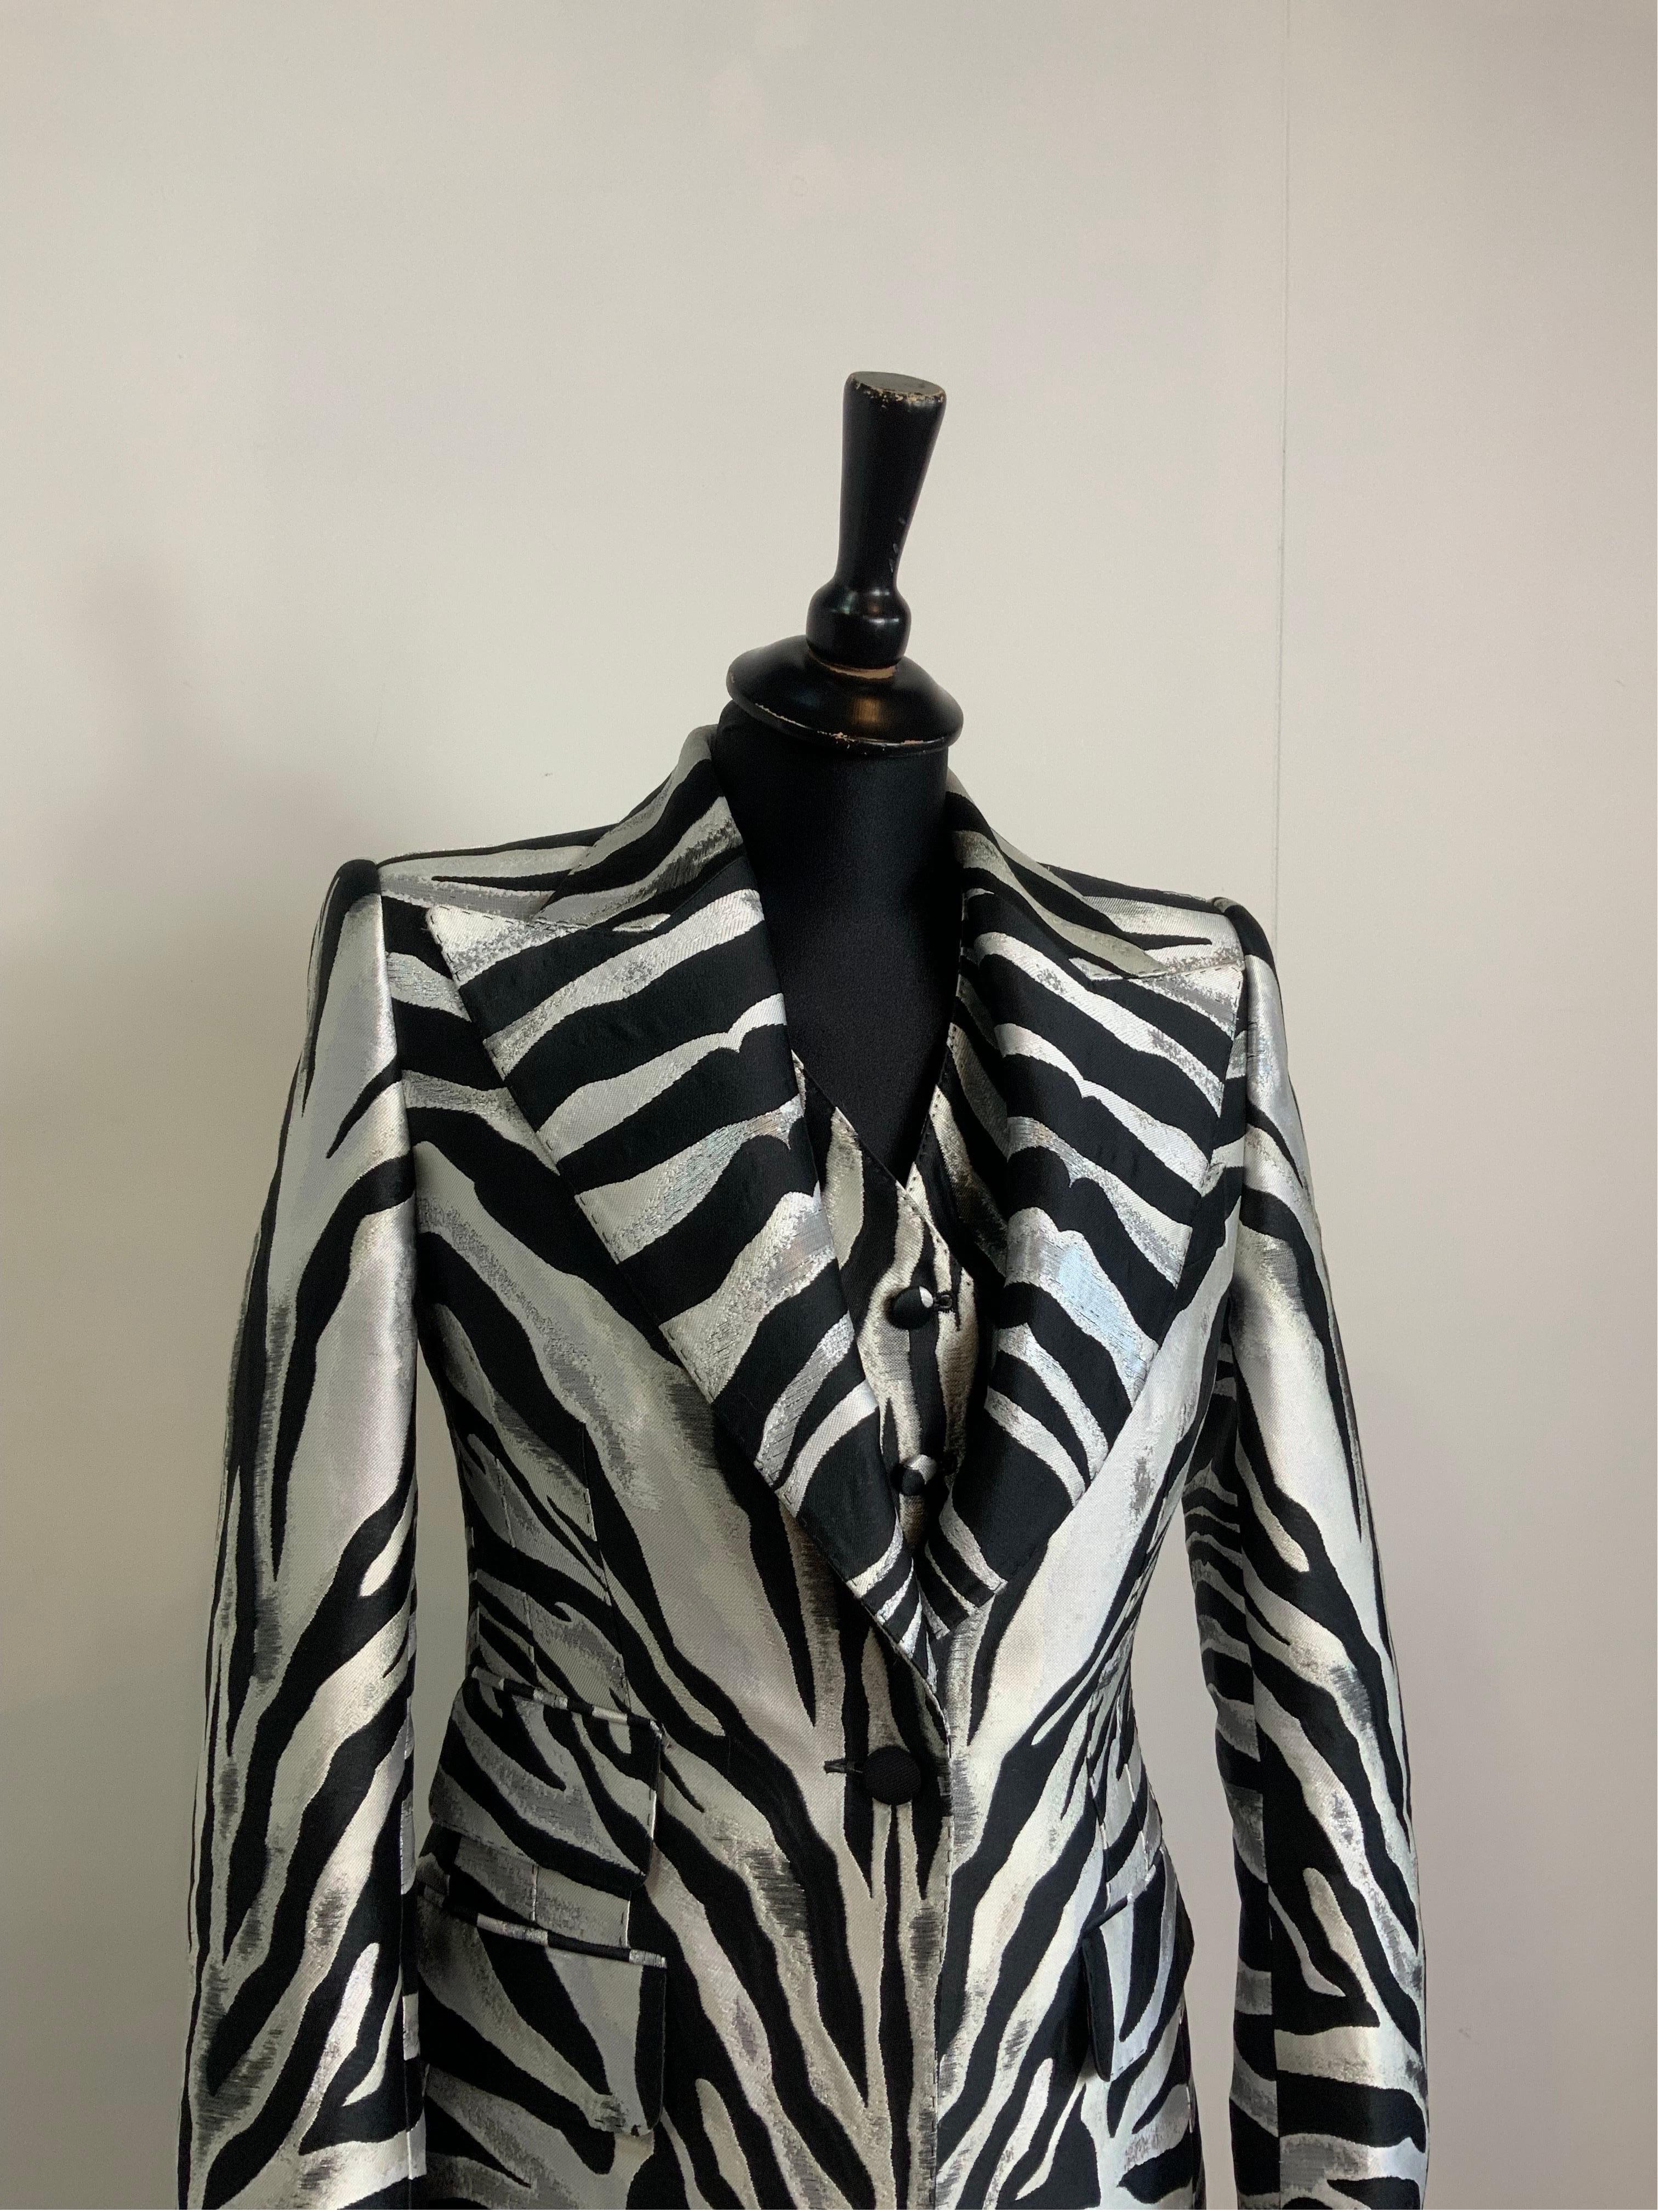 Zebra Dolce & Gabbana jacket + vest.
Spring 2022 Ready to Wear
Made of polyester and silk. Lined in leopard print.
The jacket is an Italian 36.
Shoulder 38 cm
Bust 38 cm
Length 80 cm
Sleeve 60 cm
The vest is an Italian 42.
Bust 42 cm
Length 56 cm
In